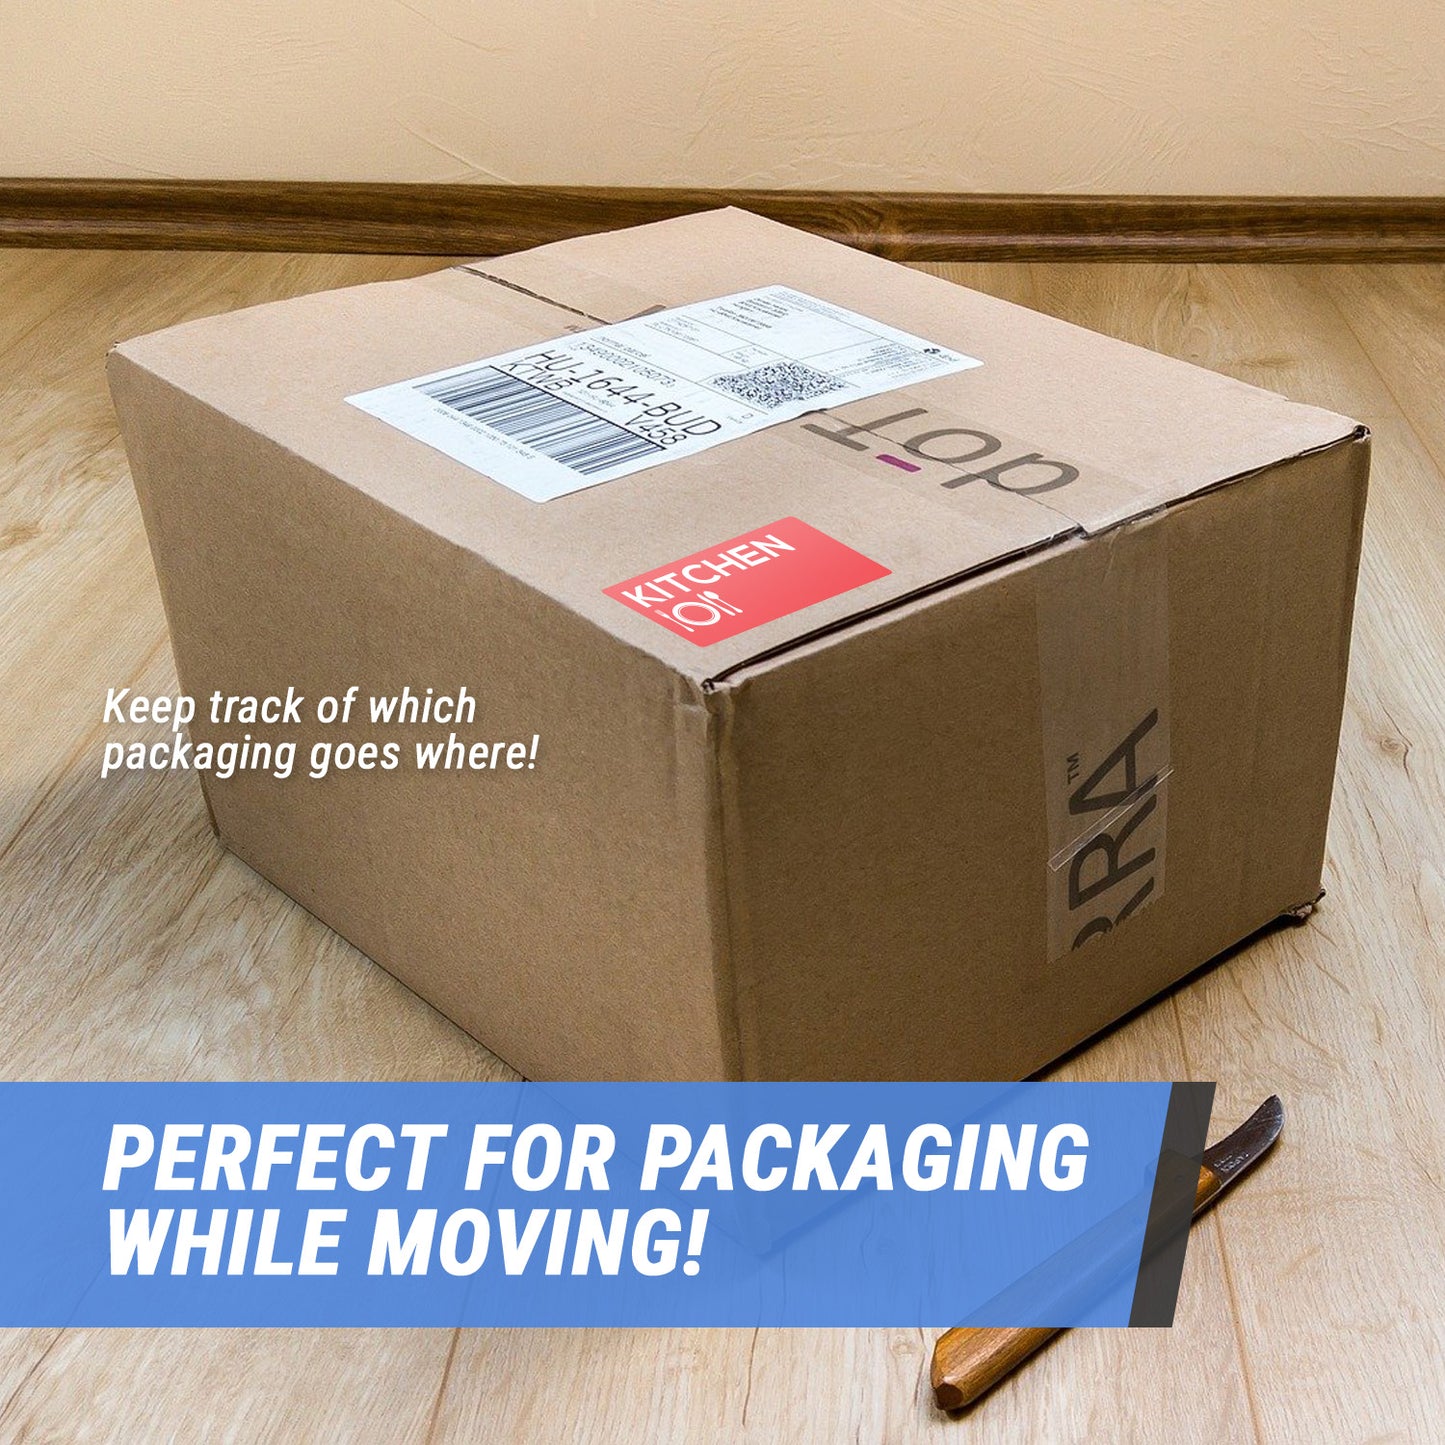 4 x 2 inch |  Moving & Packing: Kitchen Stickers